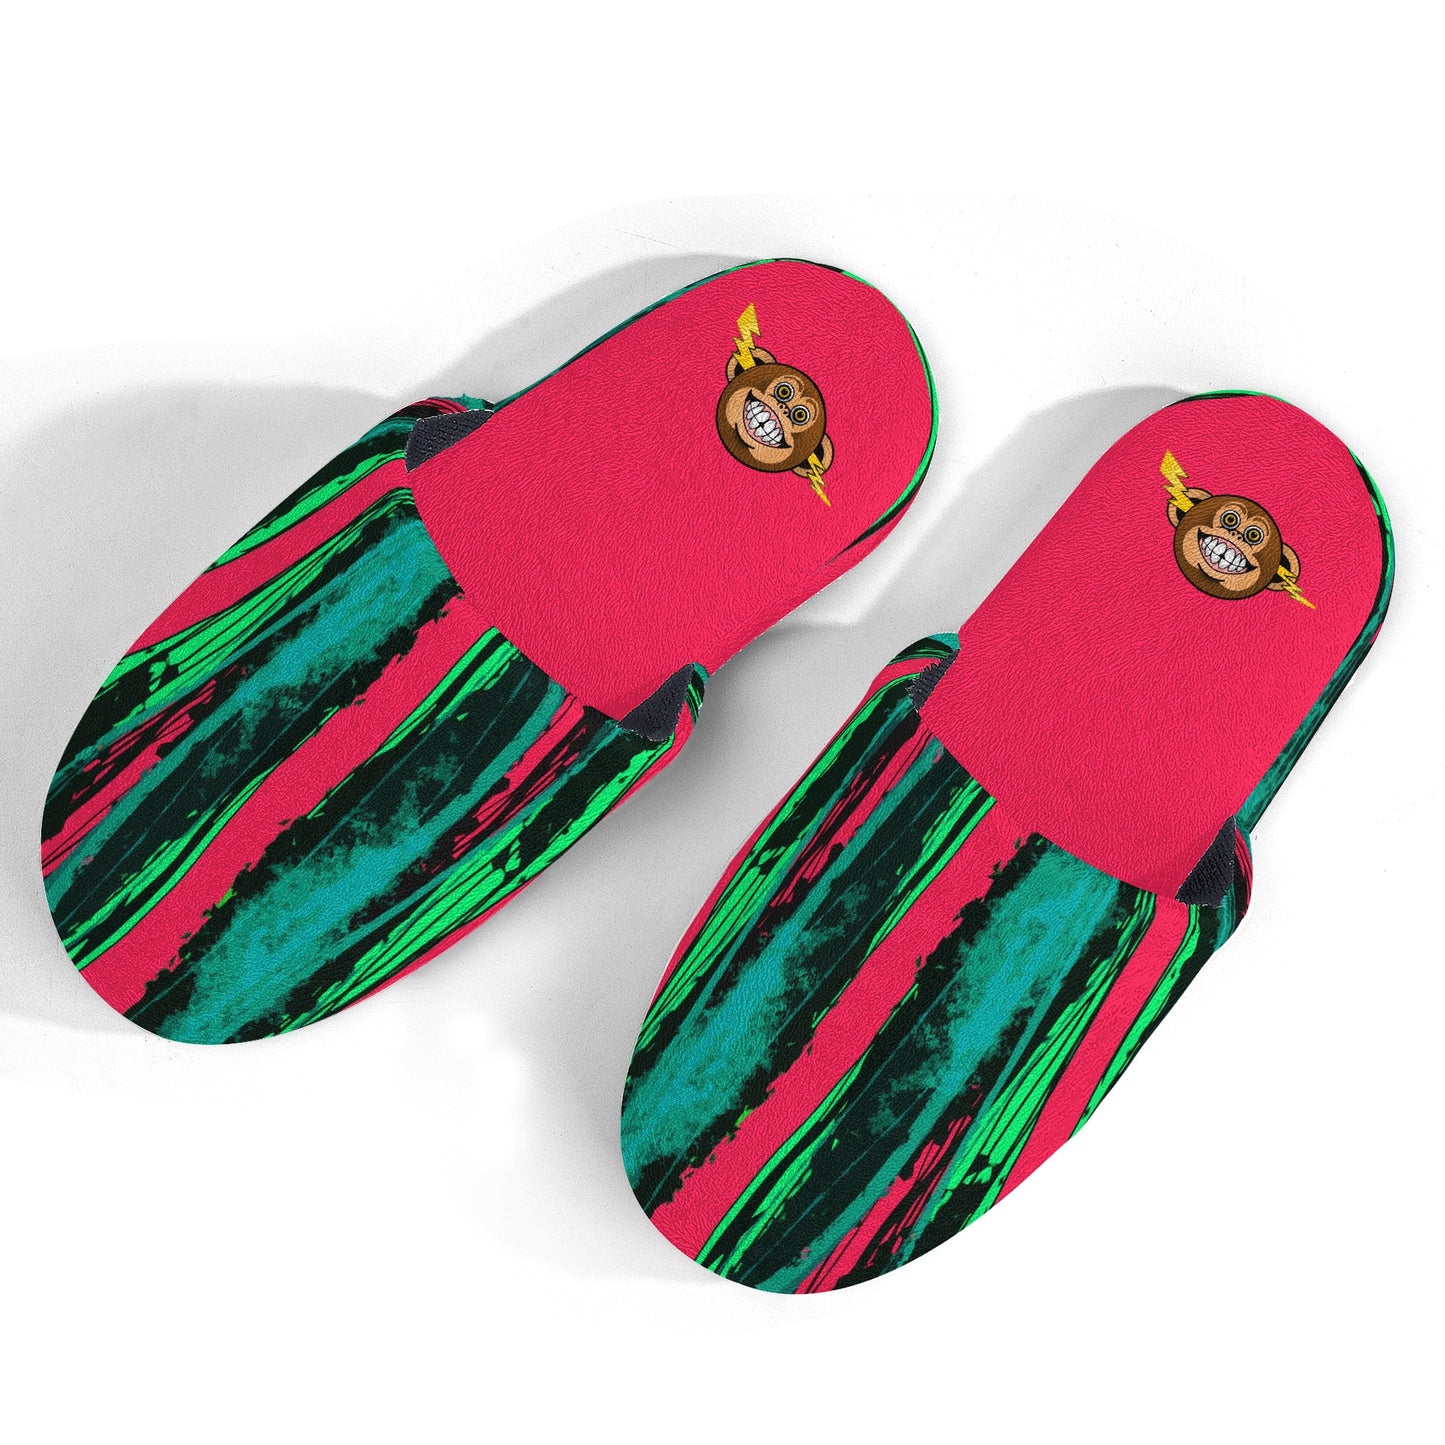 Majestic Melon Lounger Slippers